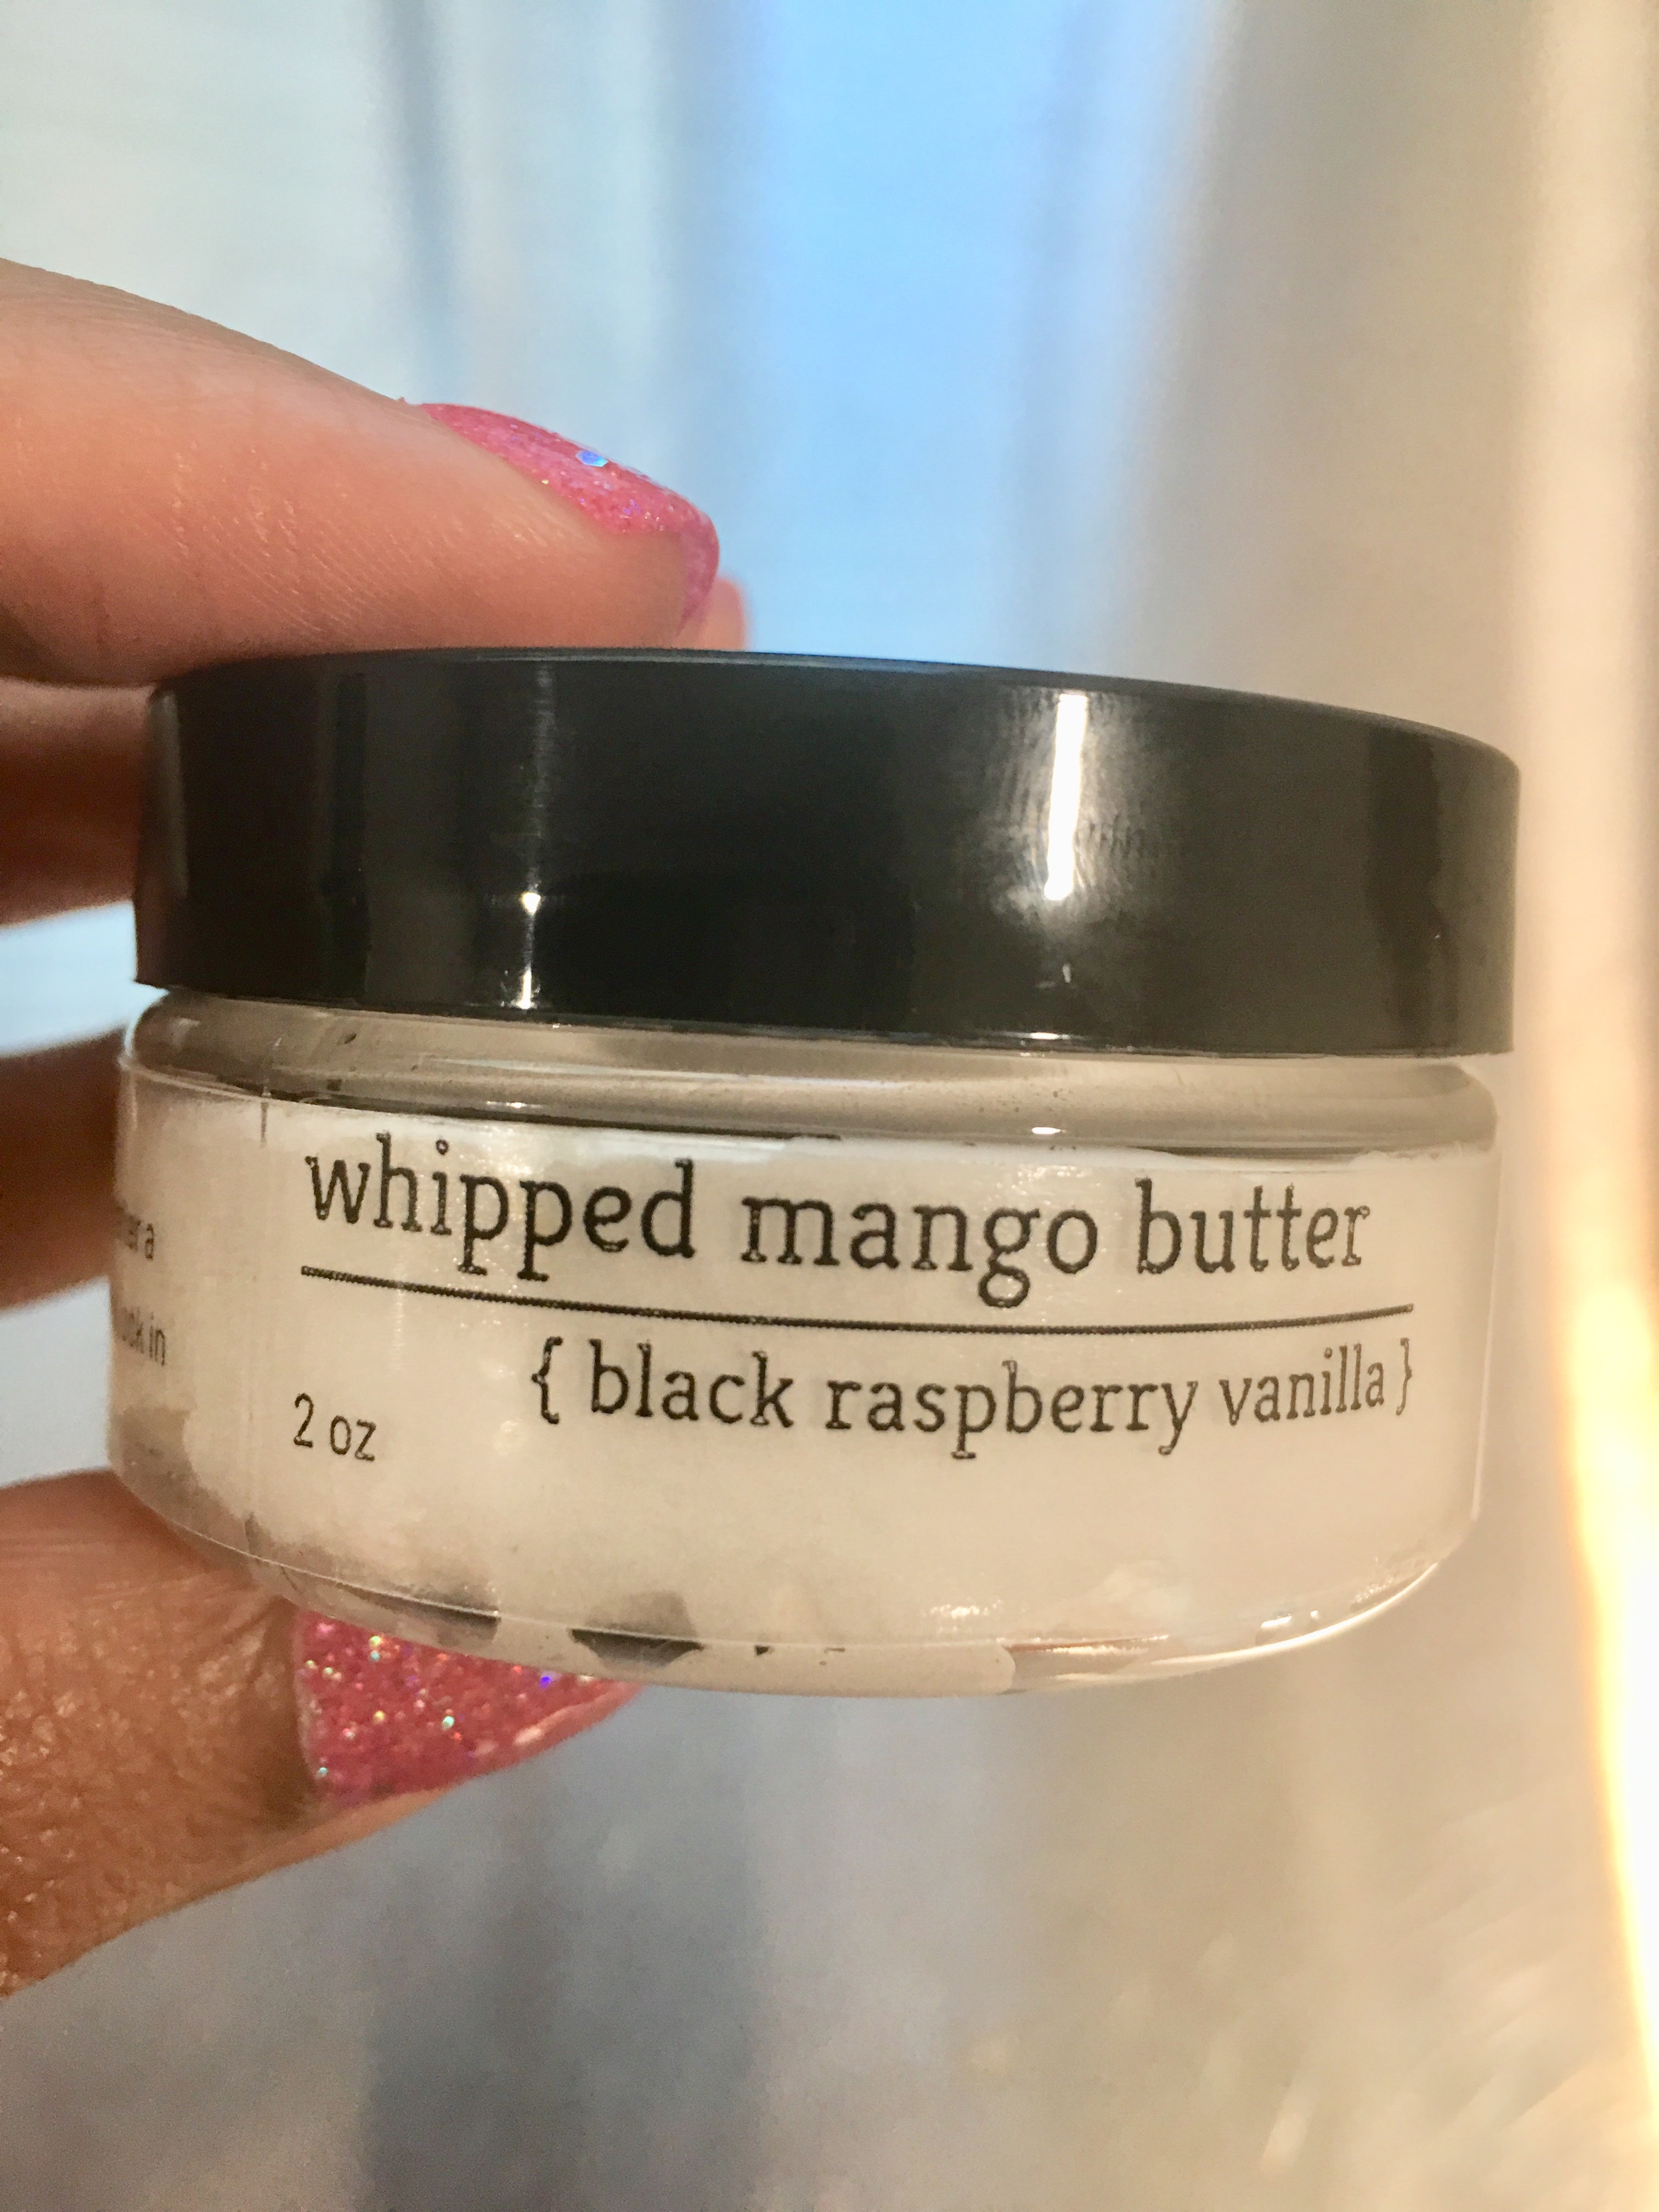 (12) Wholesale Whipped Mango Butter: Suggested Retail Price $6-$9 each